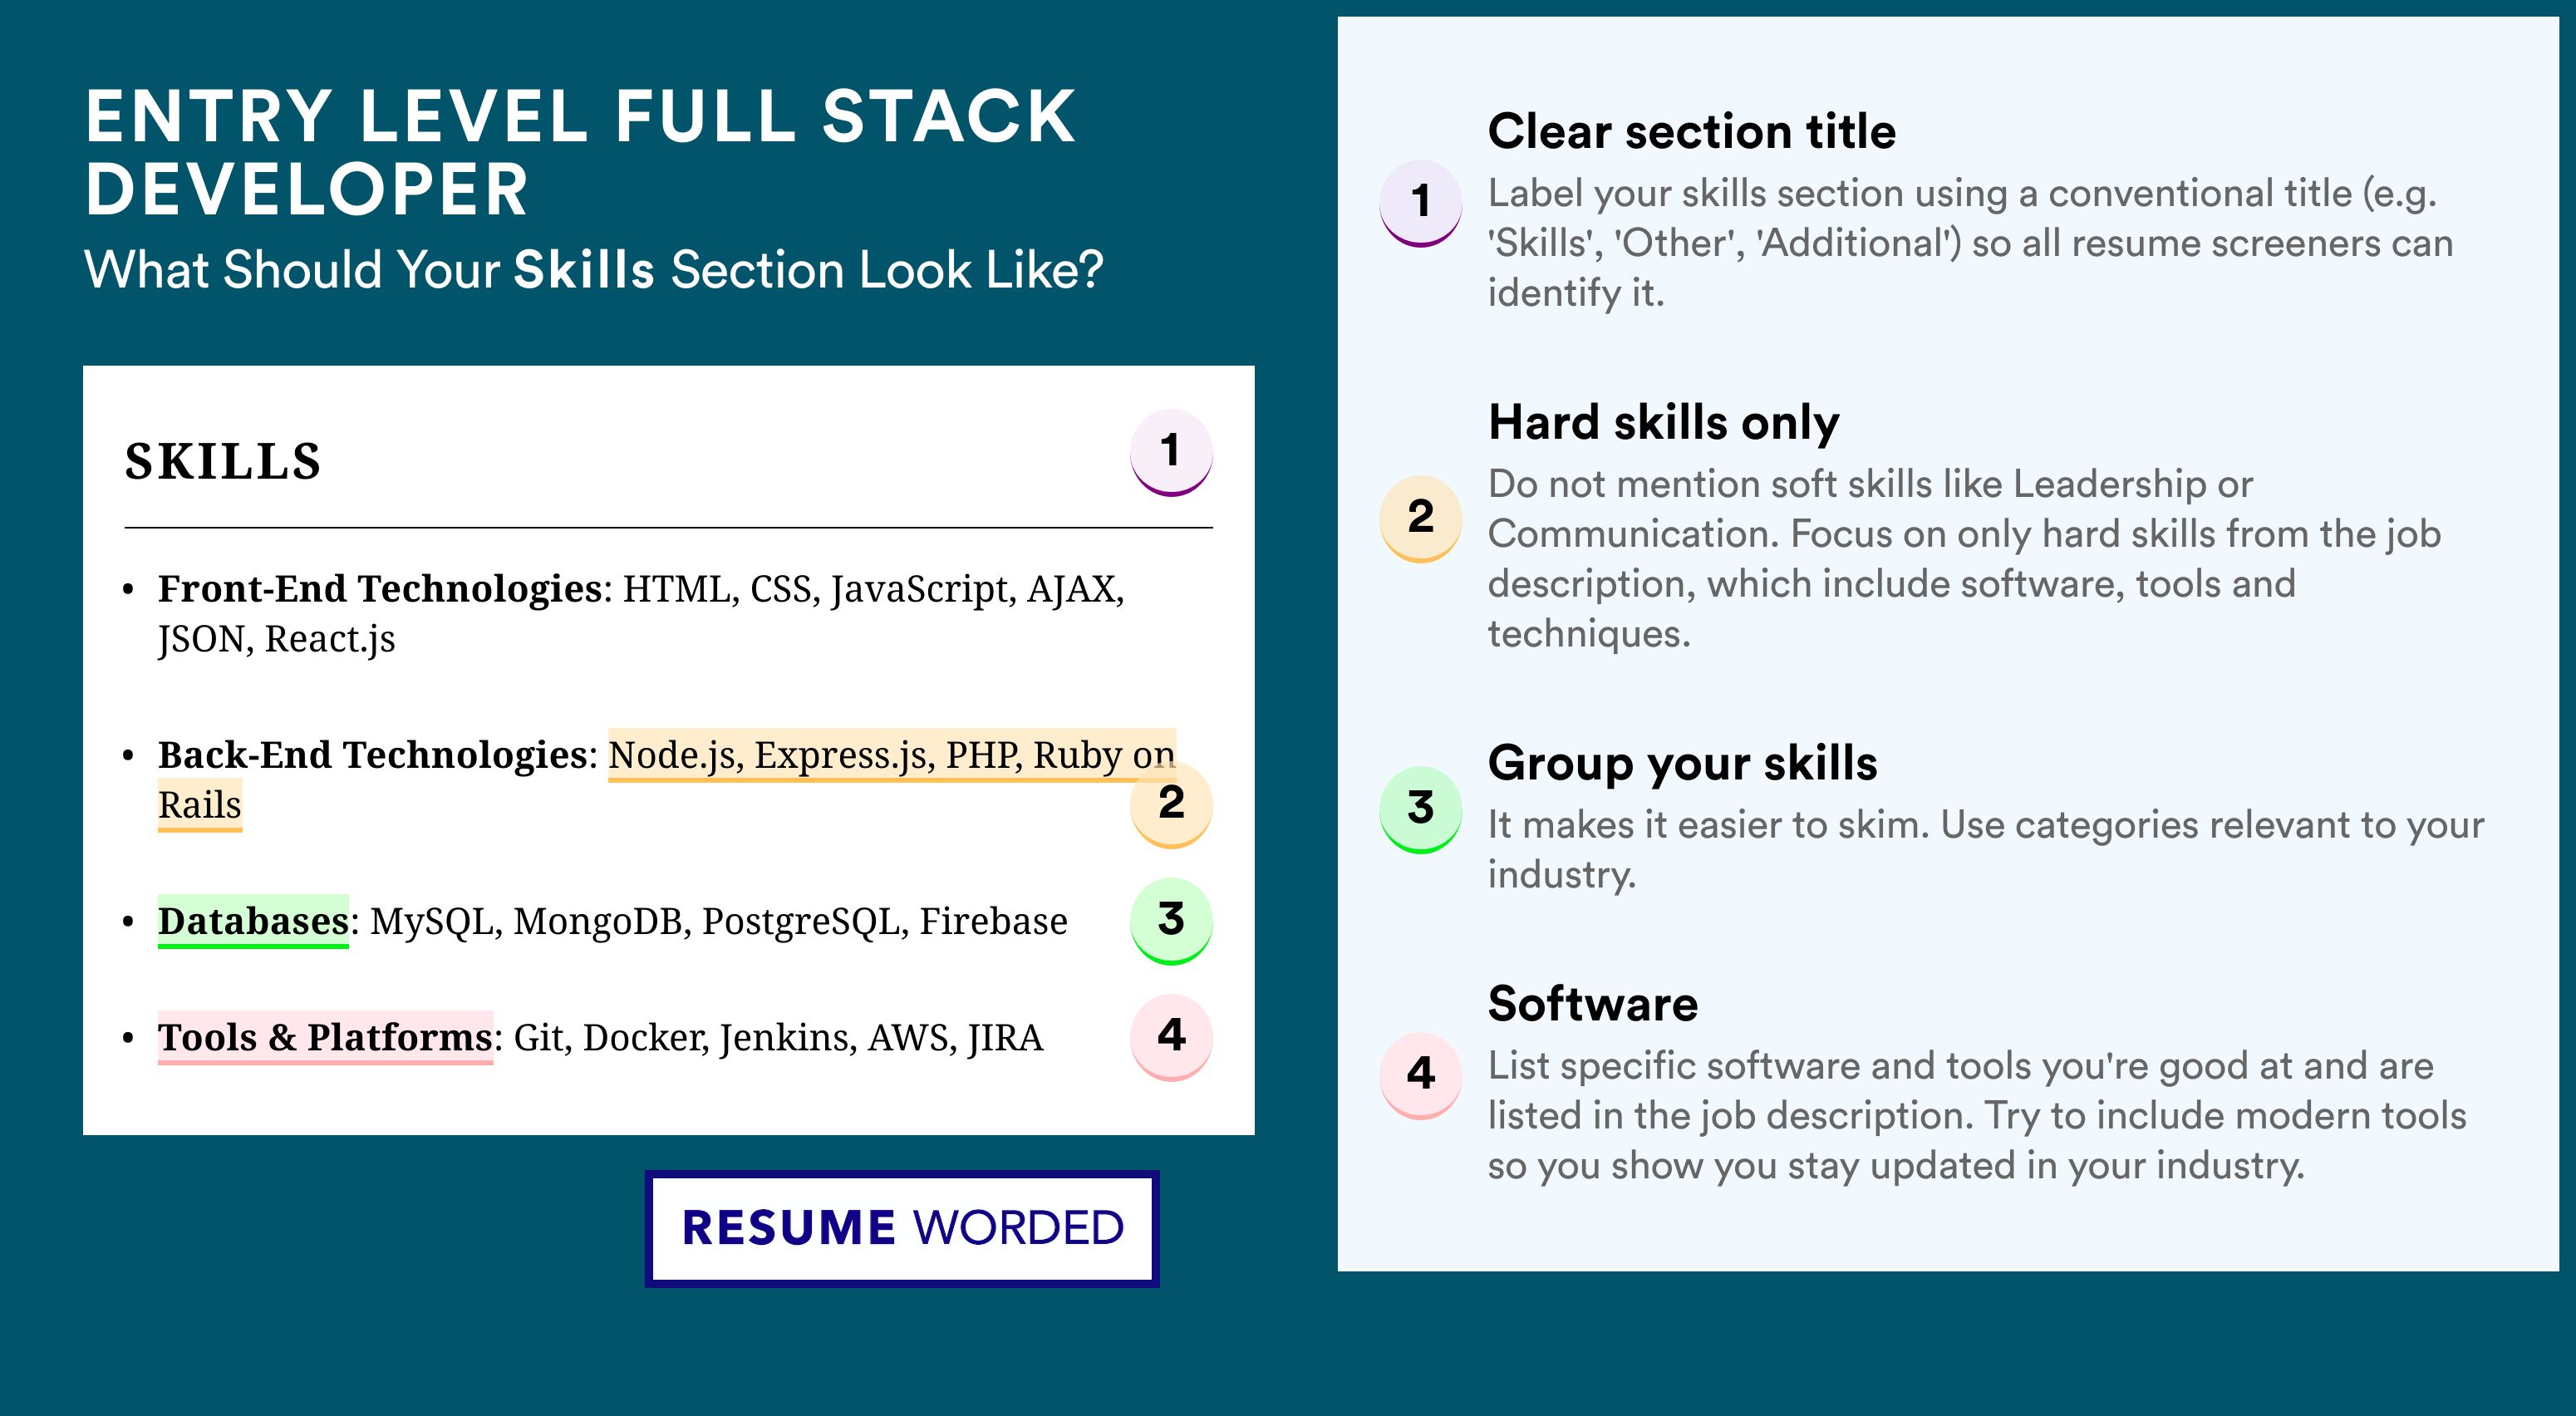 How To Write Your Skills Section - Entry Level Full Stack Developer Roles